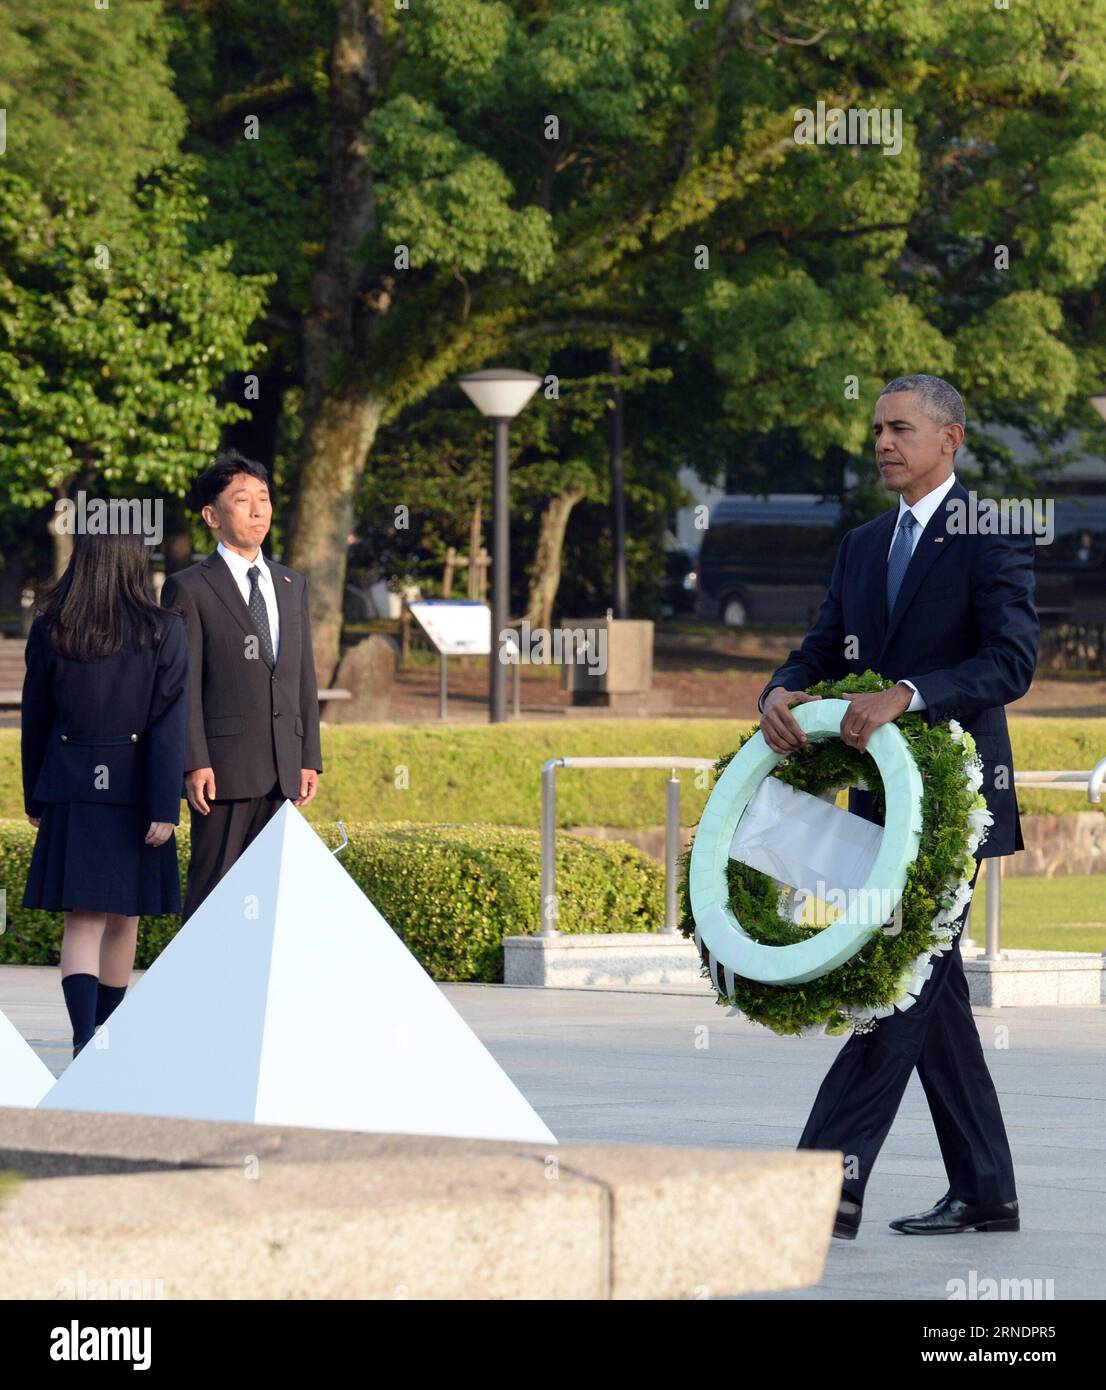 (160528) -- HIROSHIMA, May 28, 2016 -- U.S. President Barack Obama (R) lays a wreath in front of the cenotaph during his visit to the Hiroshima Peace Memorial Park in Hiroshima, Japan on May 27, 2016. Barack Obama on Friday became the first incumbent U.S. president to visit Hiroshima since America dropped an atomic bomb on the city 71 years ago, stirring mixed feelings among the United States, Japan and the victim countries during WWII. ) JAPAN-HIROSHIMA-OBAMA-VISIT MaxPing PUBLICATIONxNOTxINxCHN   Hiroshima May 28 2016 U S President Barack Obama r Lays a Wreath in Front of The Cenotaph during Stock Photo